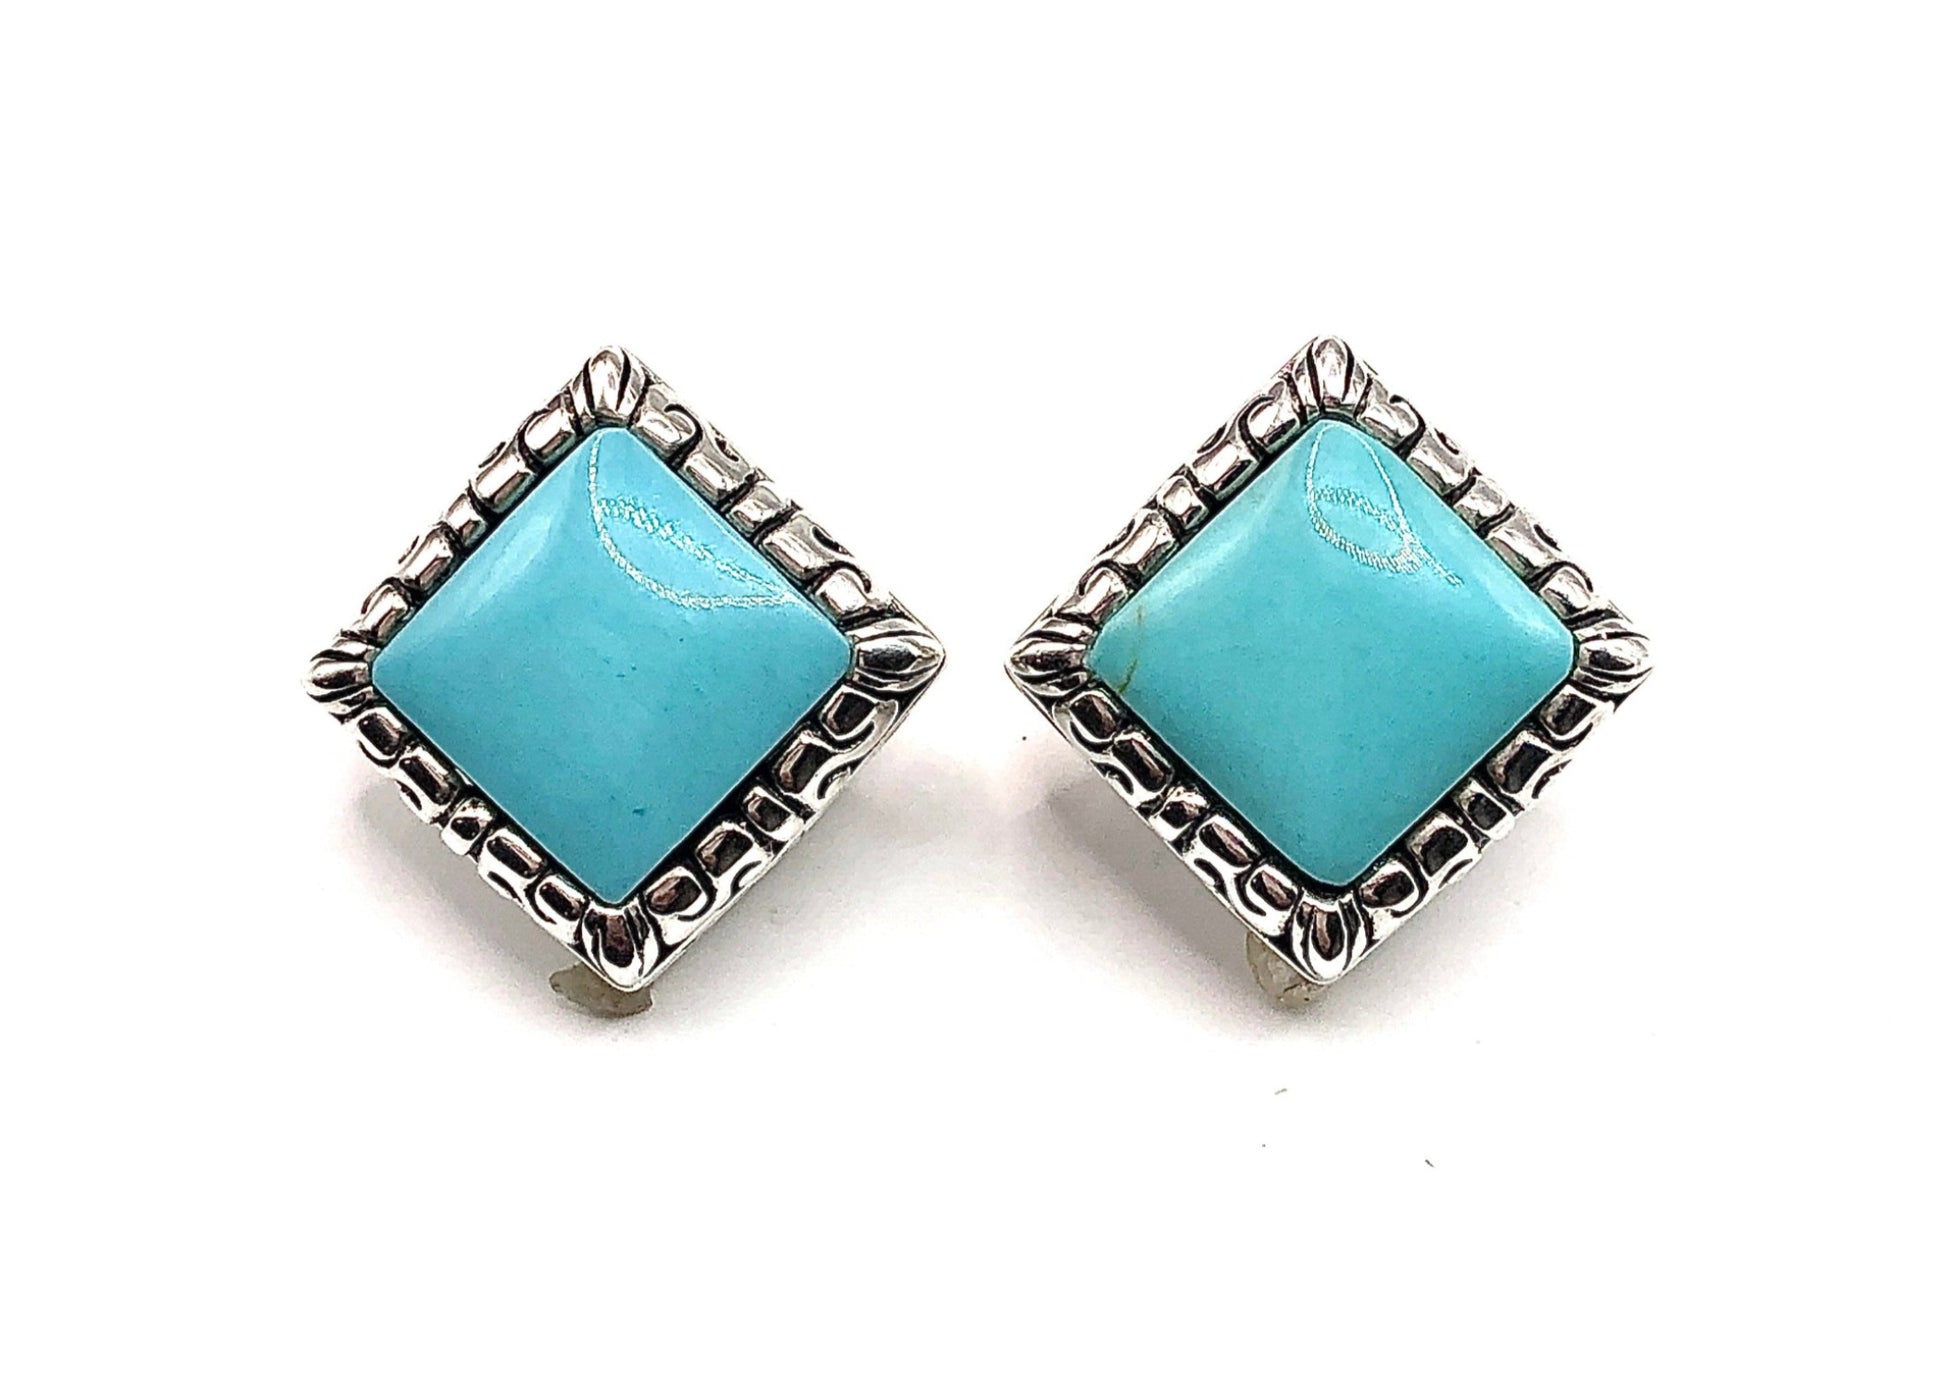 Sterling Silver Earrings, Big Blue Turquoise Stone Square Short Drop Stud Earrings - Buy best priced silver jewelry at Blingschlingers